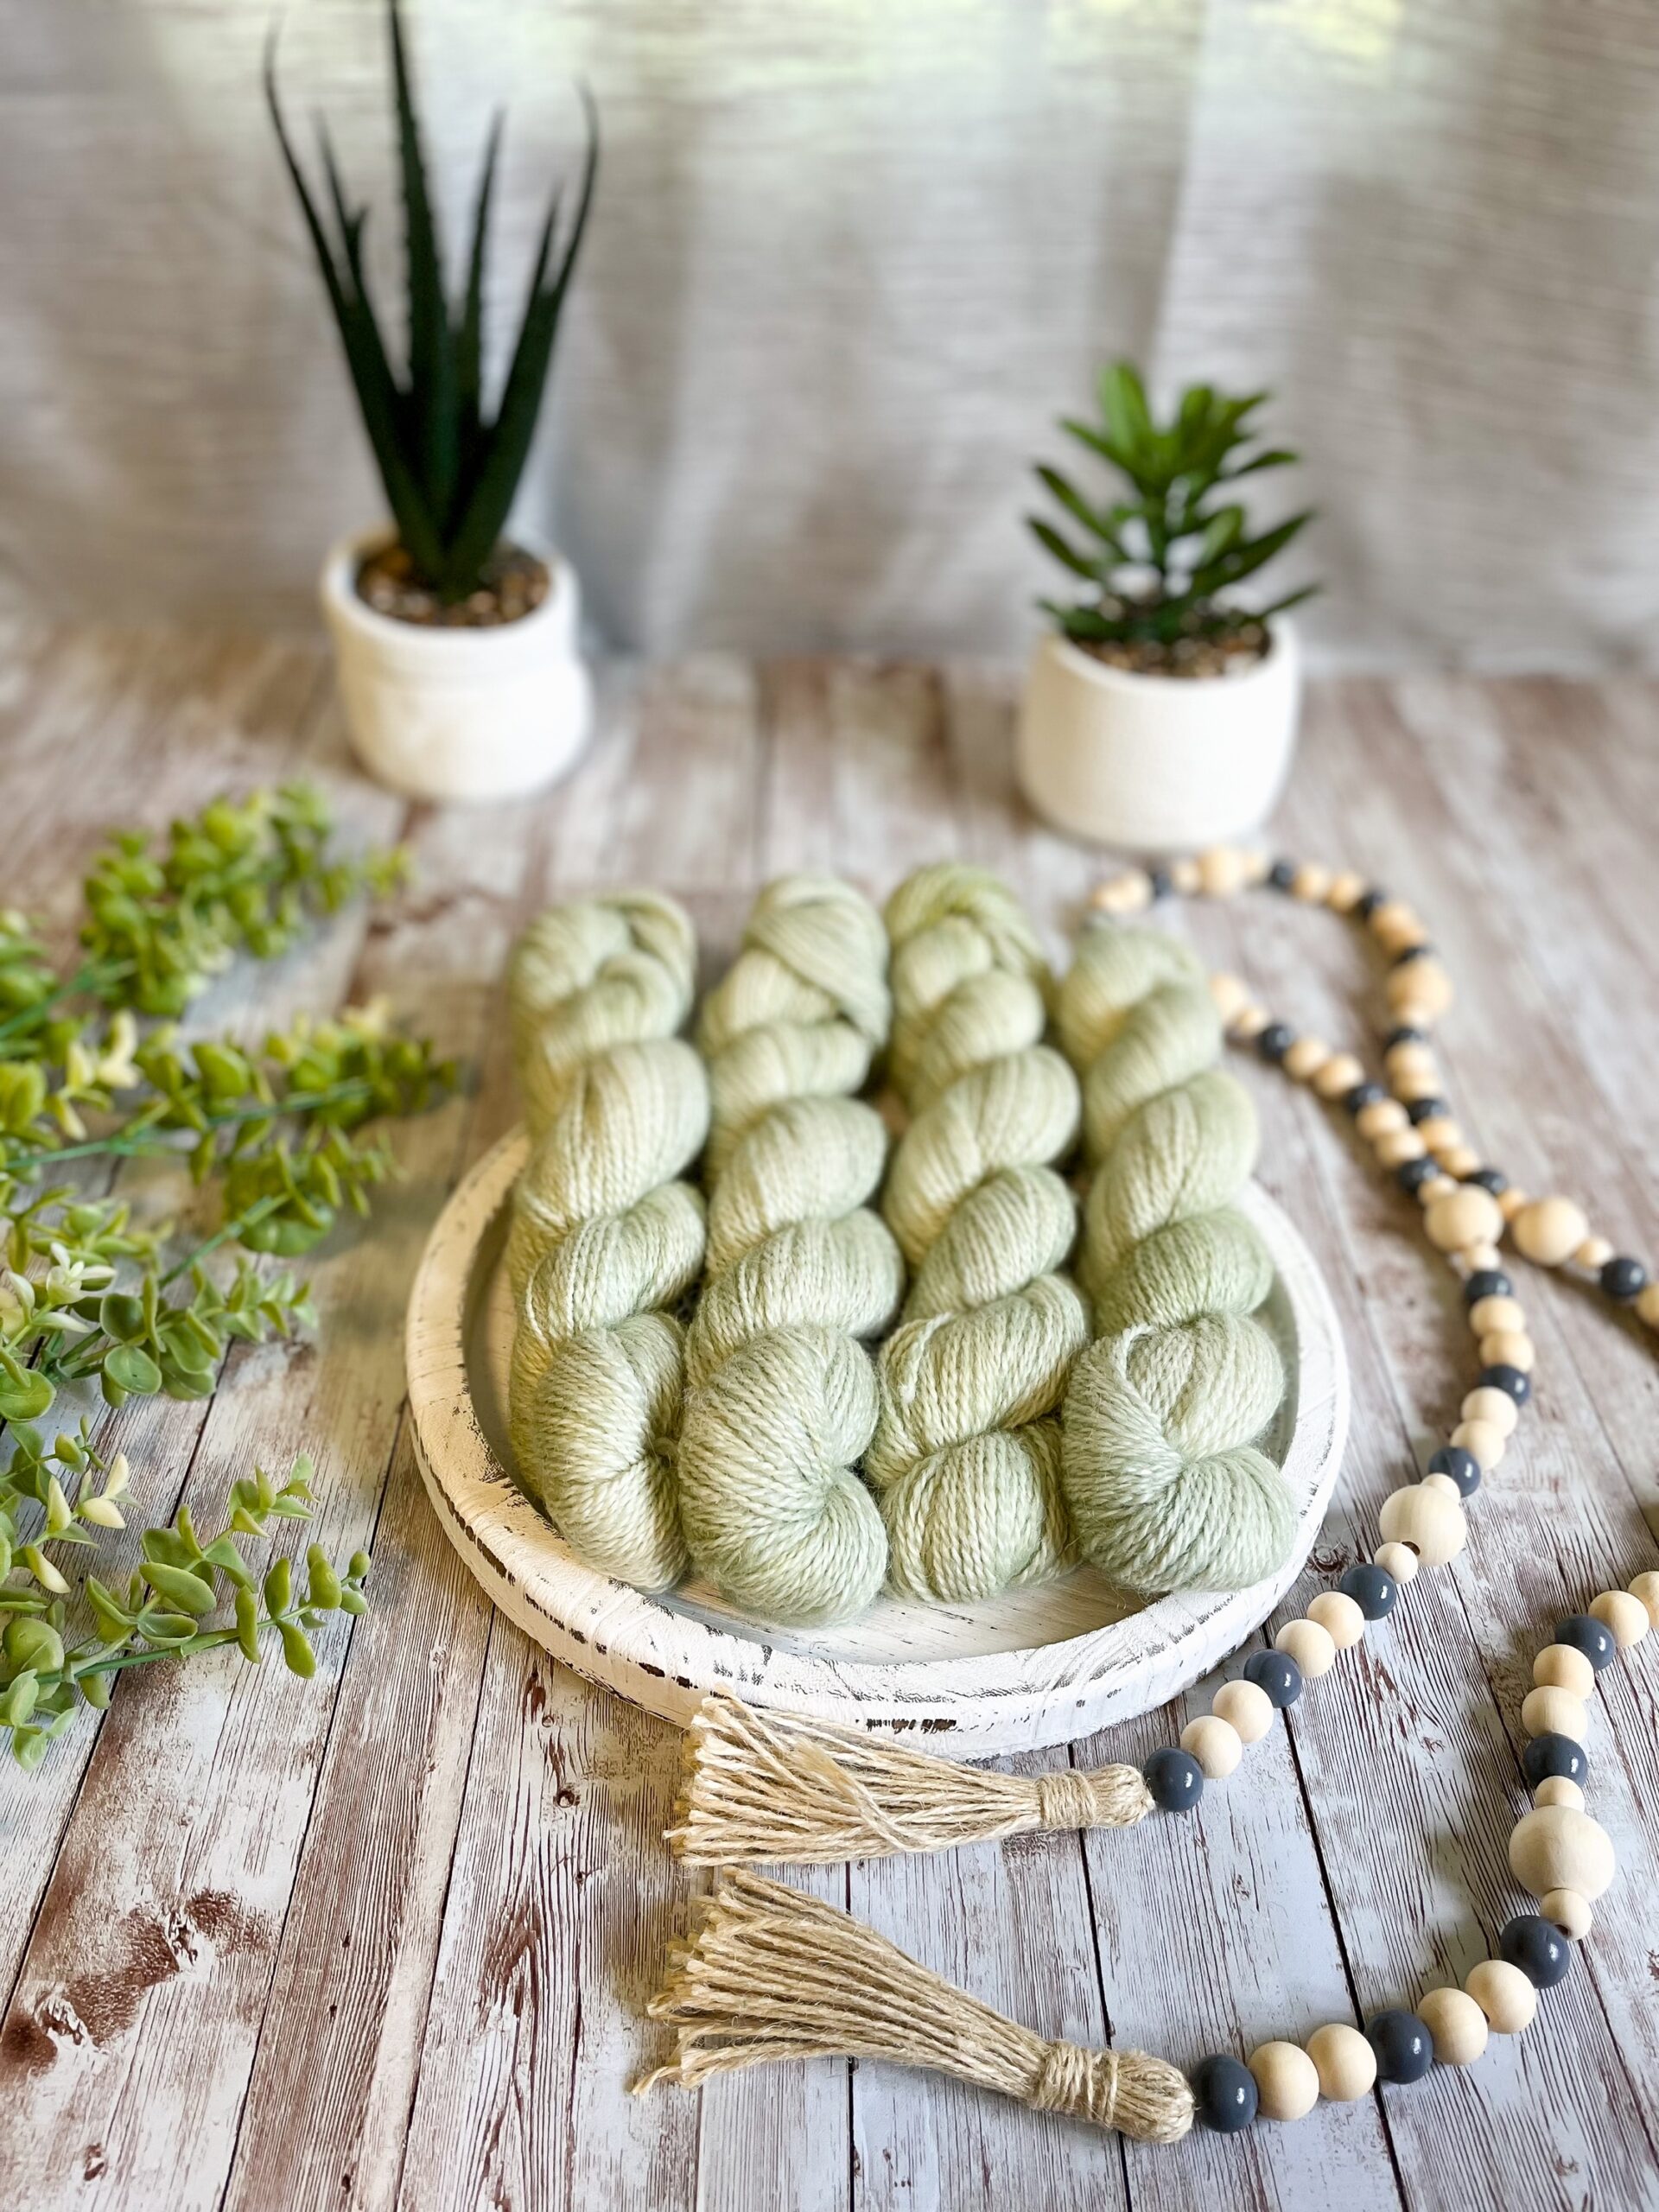 4 skeins of hand-dyed, pistachio green yarn rest on a white wooden trivet. A strand of beads is draped to the right, some greenery is on the left, and 2 succulent plants are in the background.